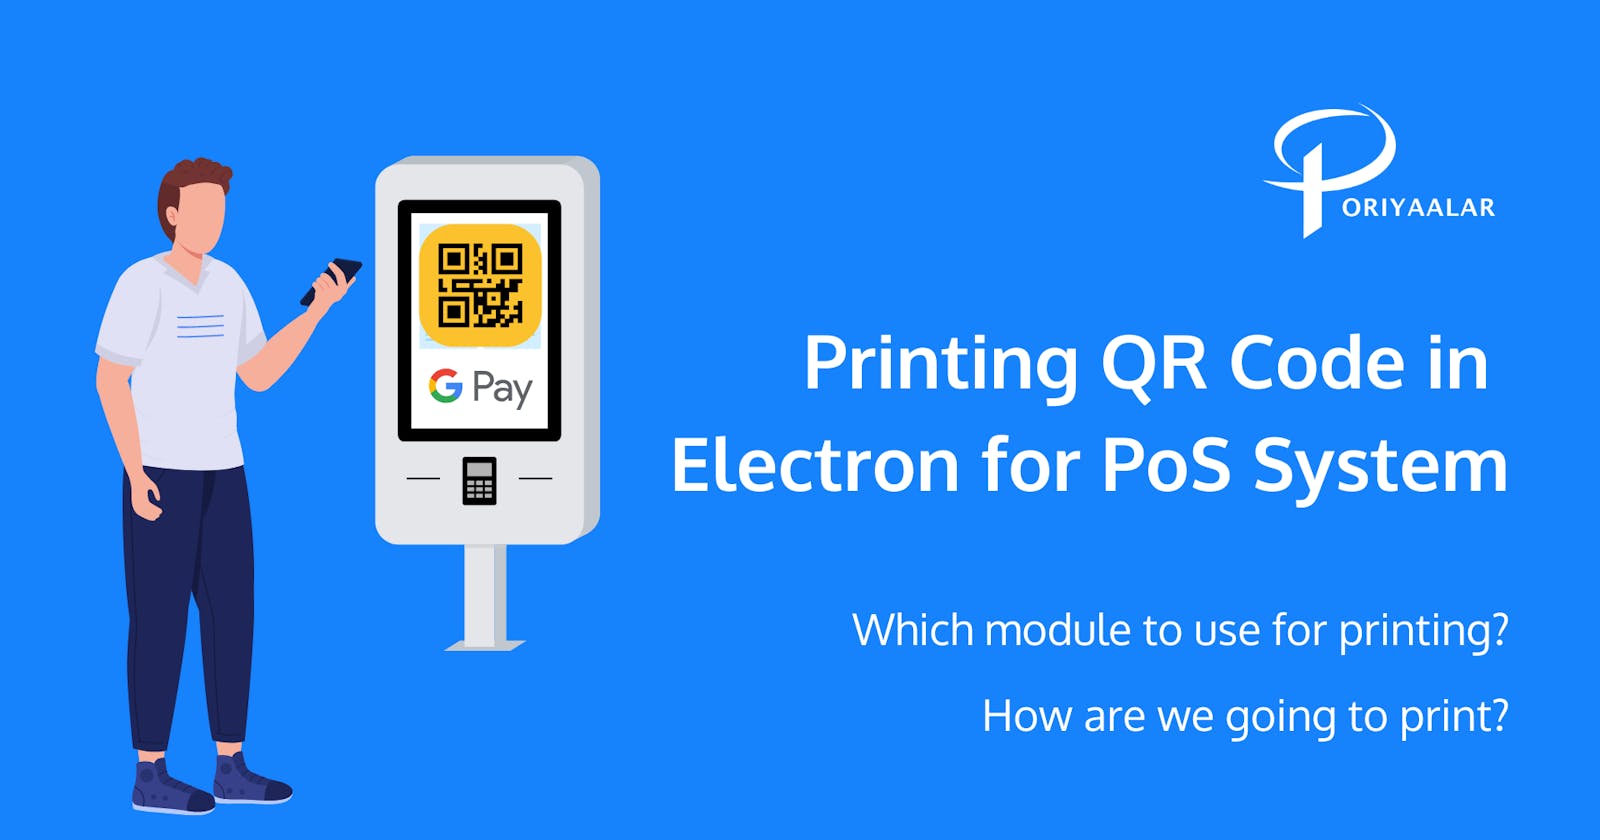 Printing QR Code in Electron for PoS System